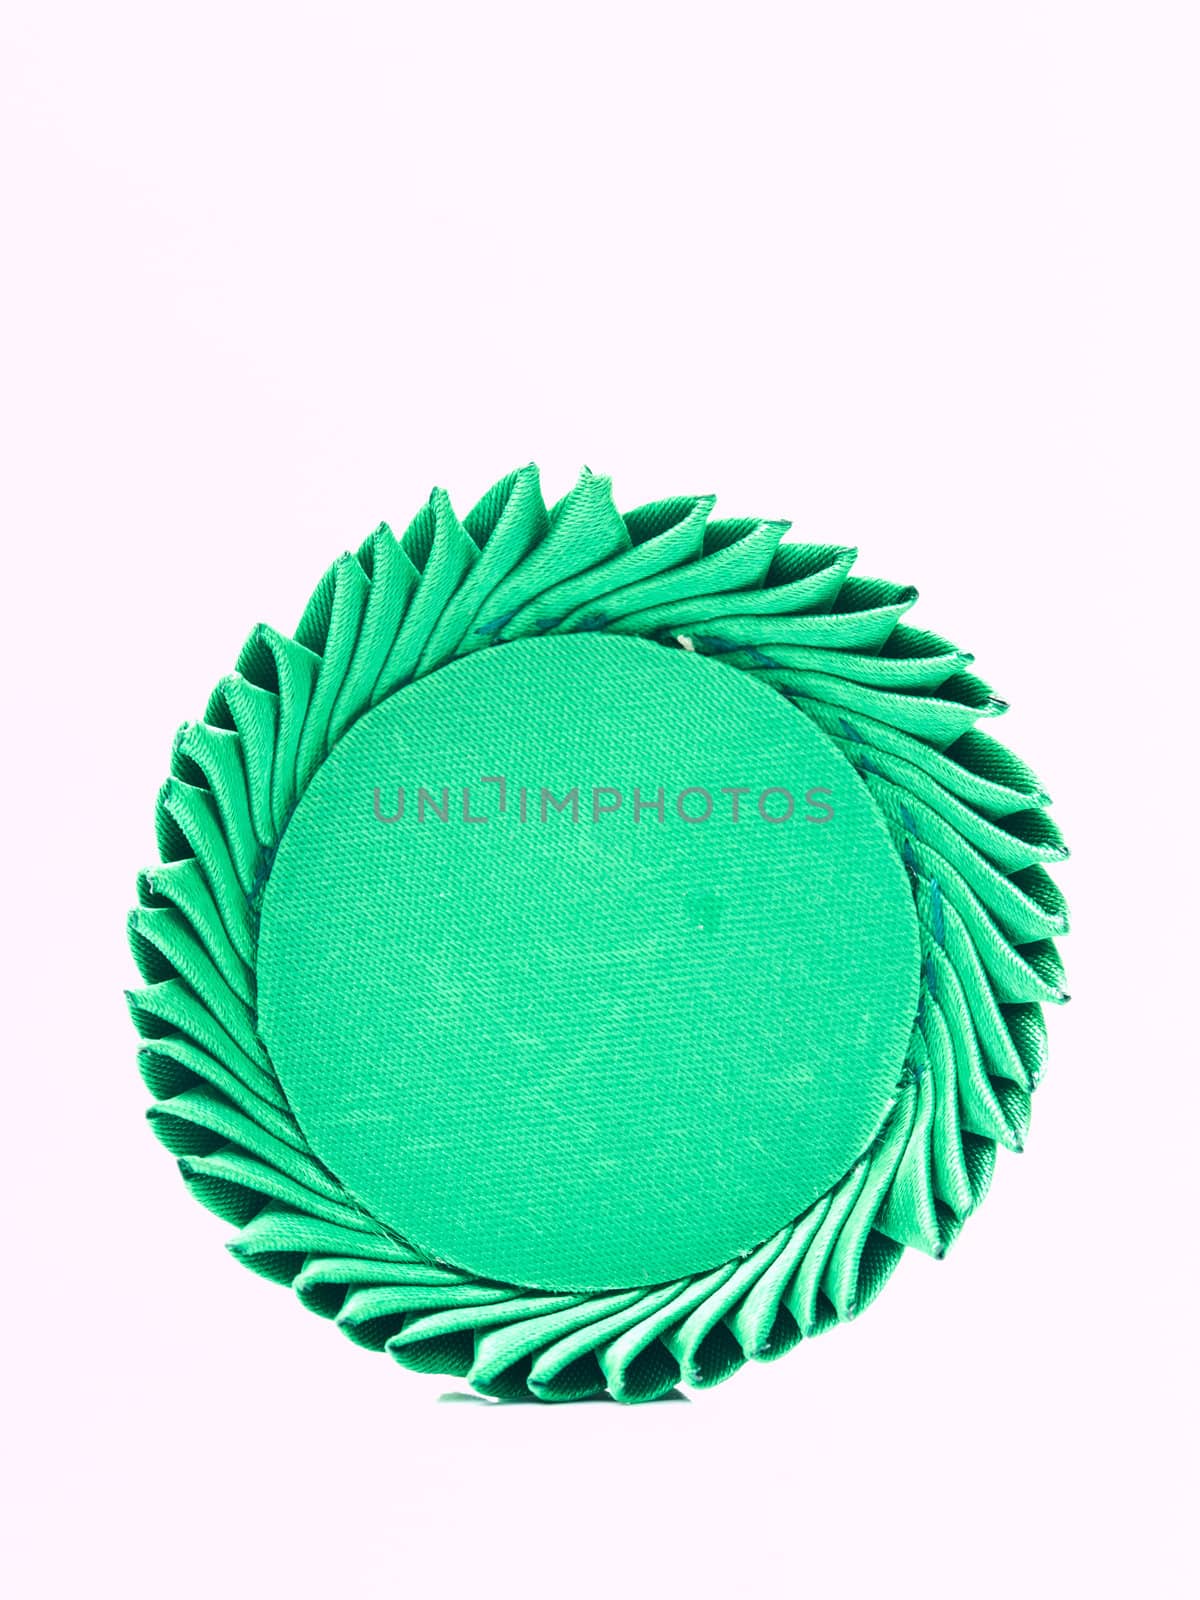 A miniature of Thai traditional tray made from green silk isolated on white background